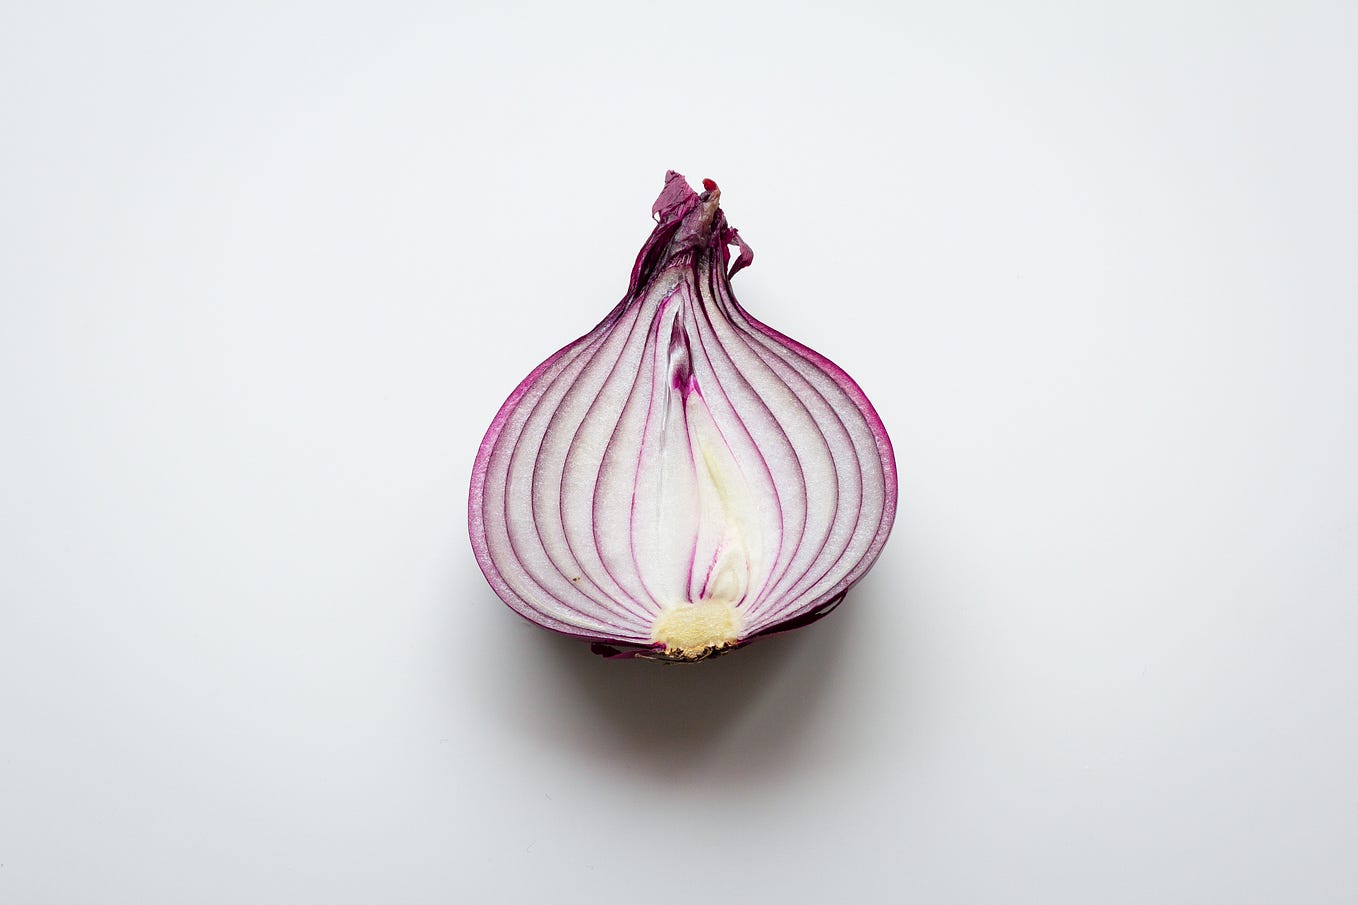 Back to Cooking Basics: The Versatile Onion